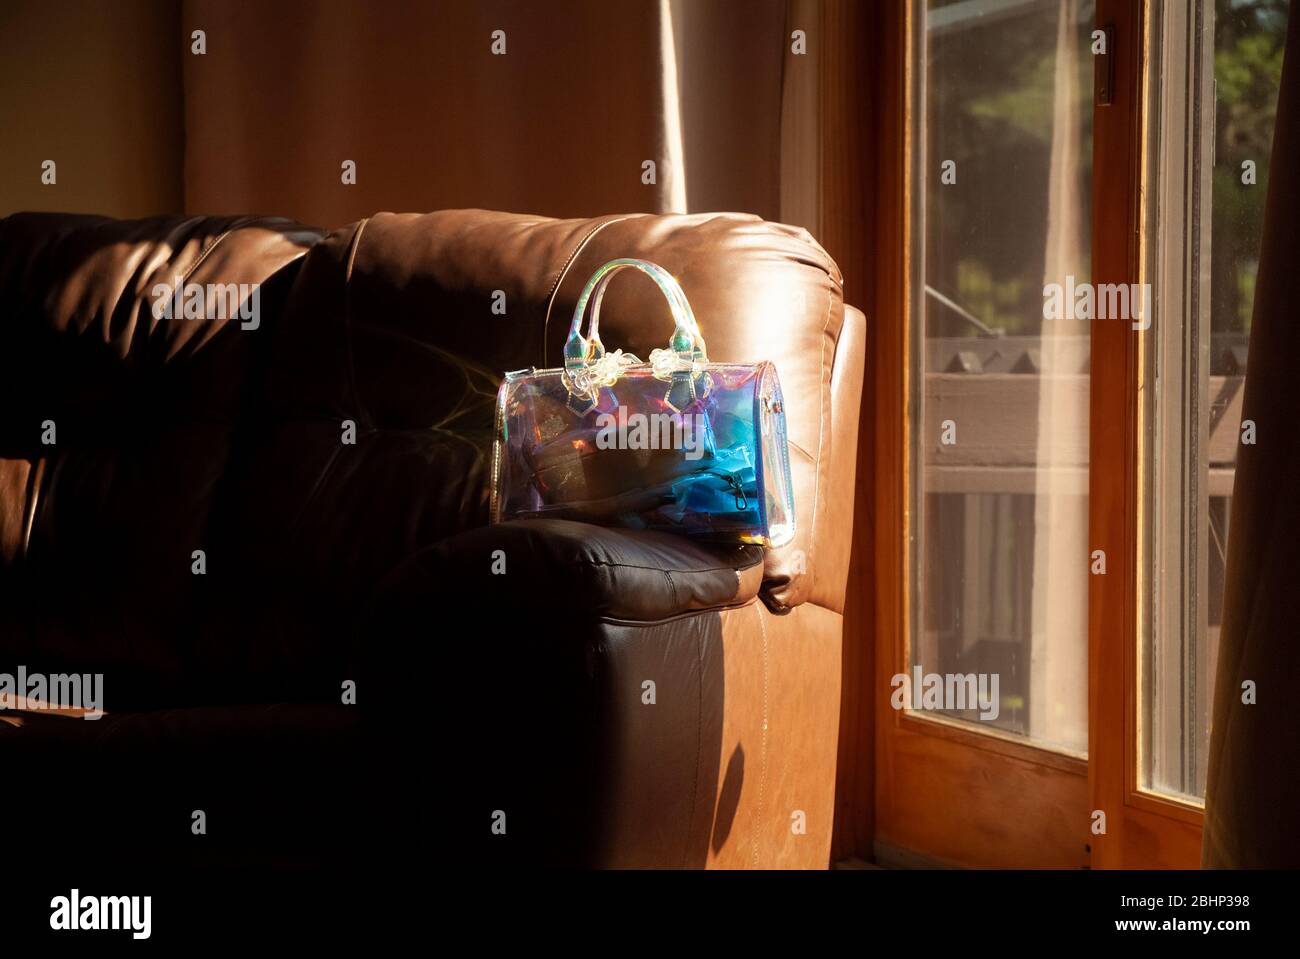 REMINISCENT: A woman's transparent purse rest on the arm rest of a sofa in the living room of a residential home. Stock Photo